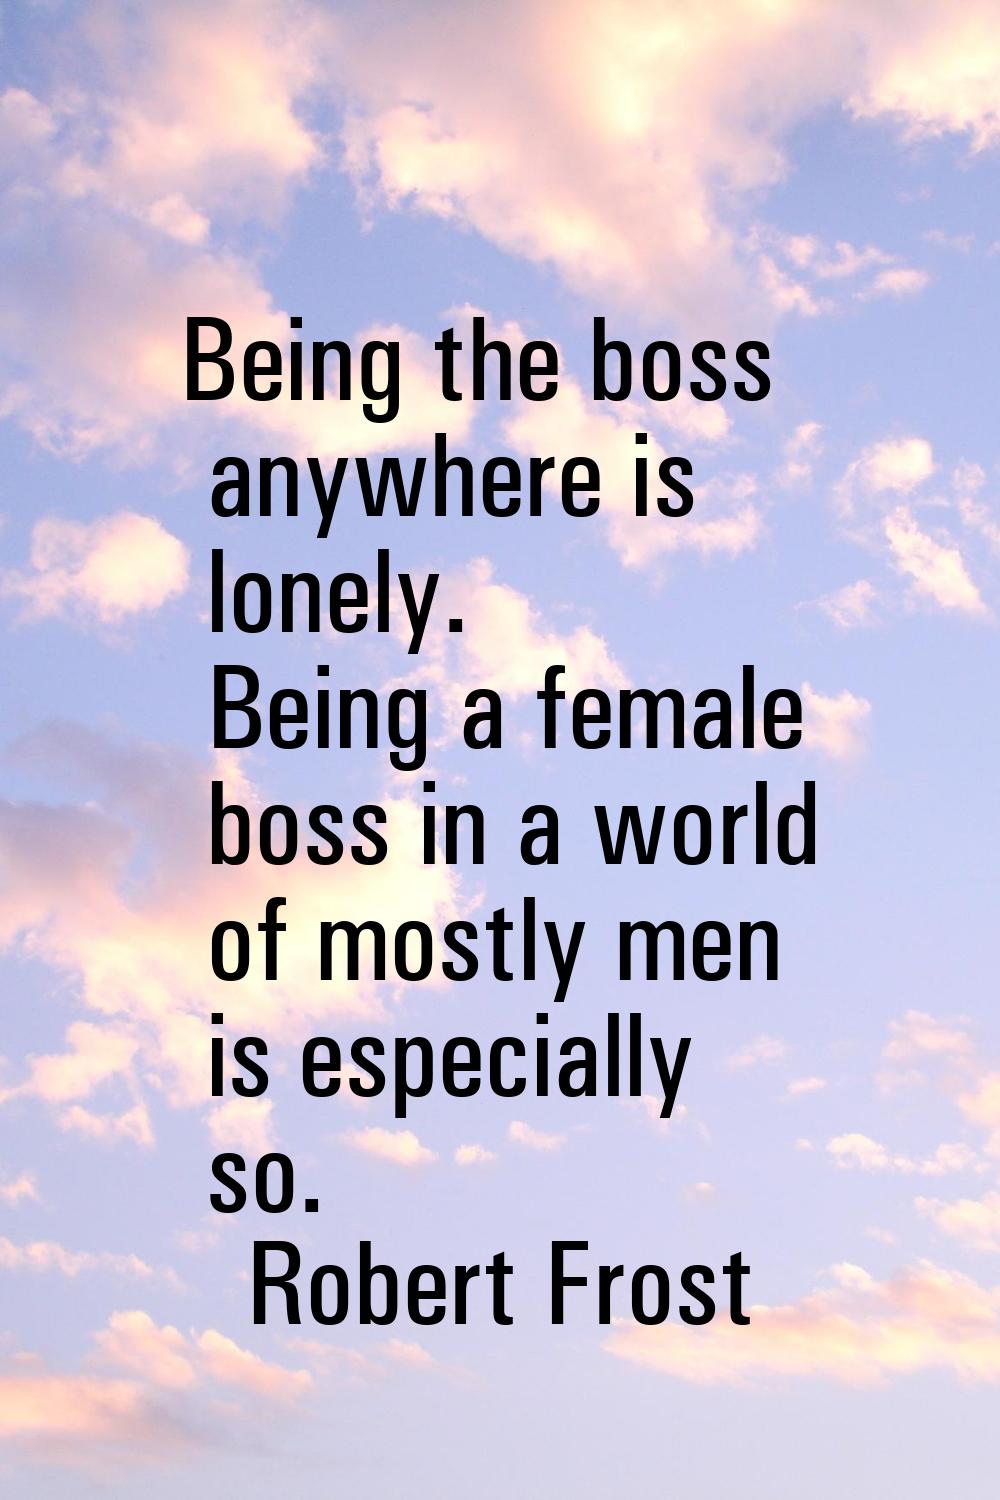 Being the boss anywhere is lonely. Being a female boss in a world of mostly men is especially so.